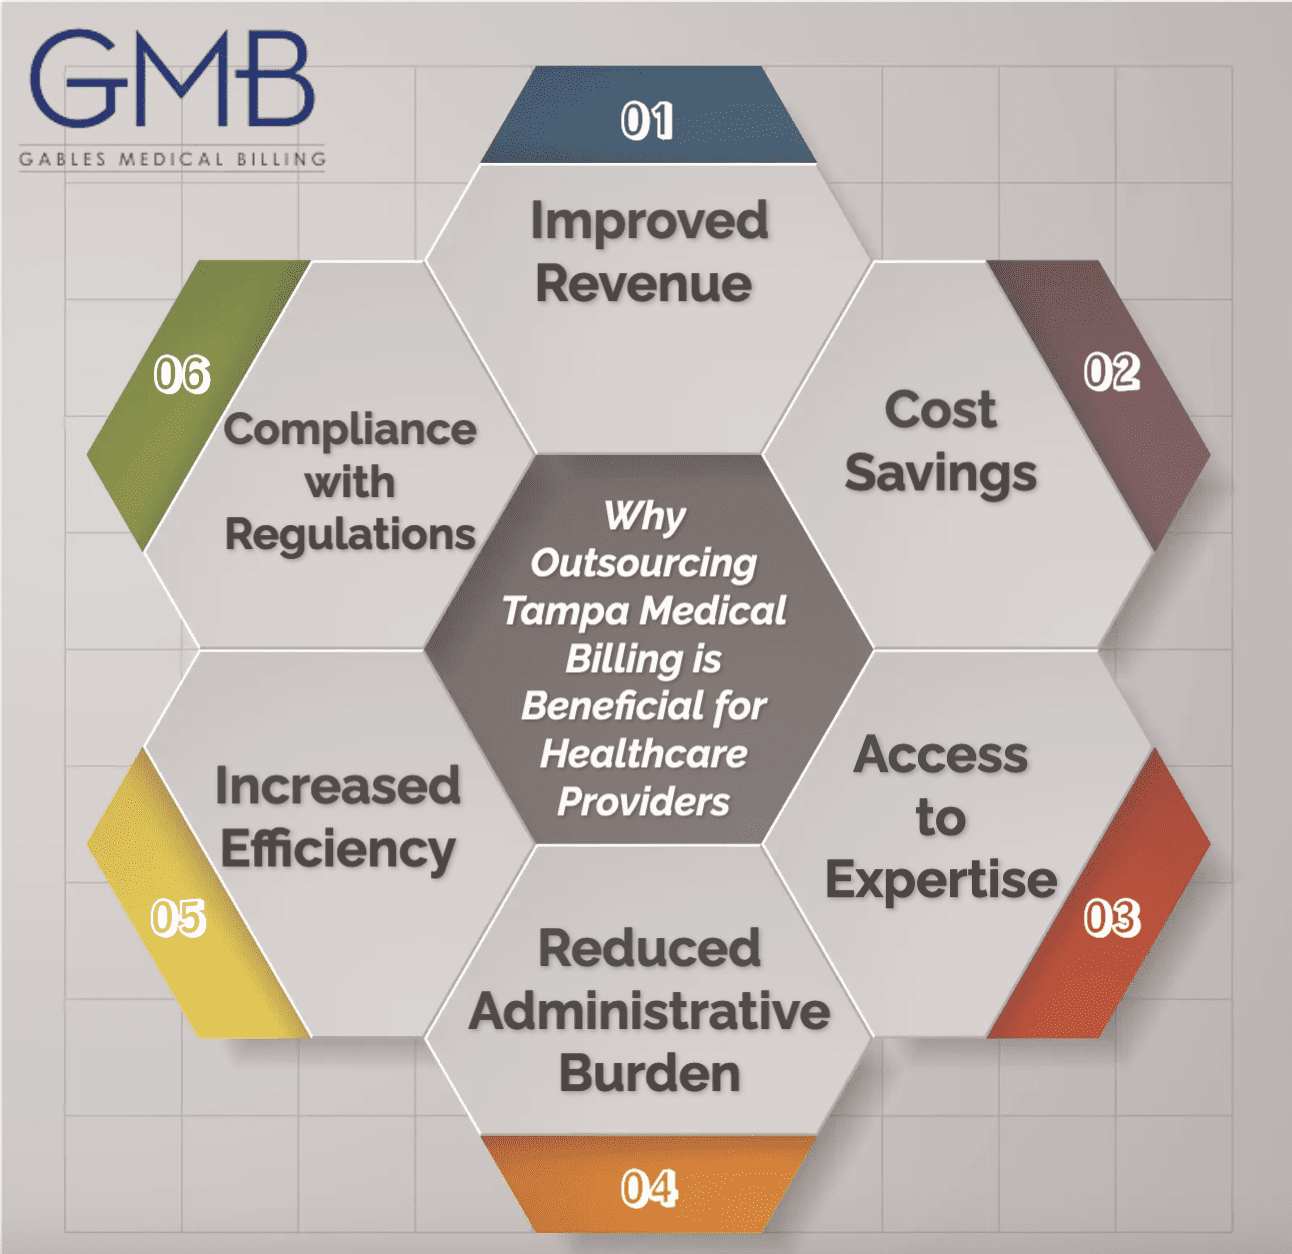 Why Outsourcing Tampa Medical Billing is Beneficial for Healthcare Providers